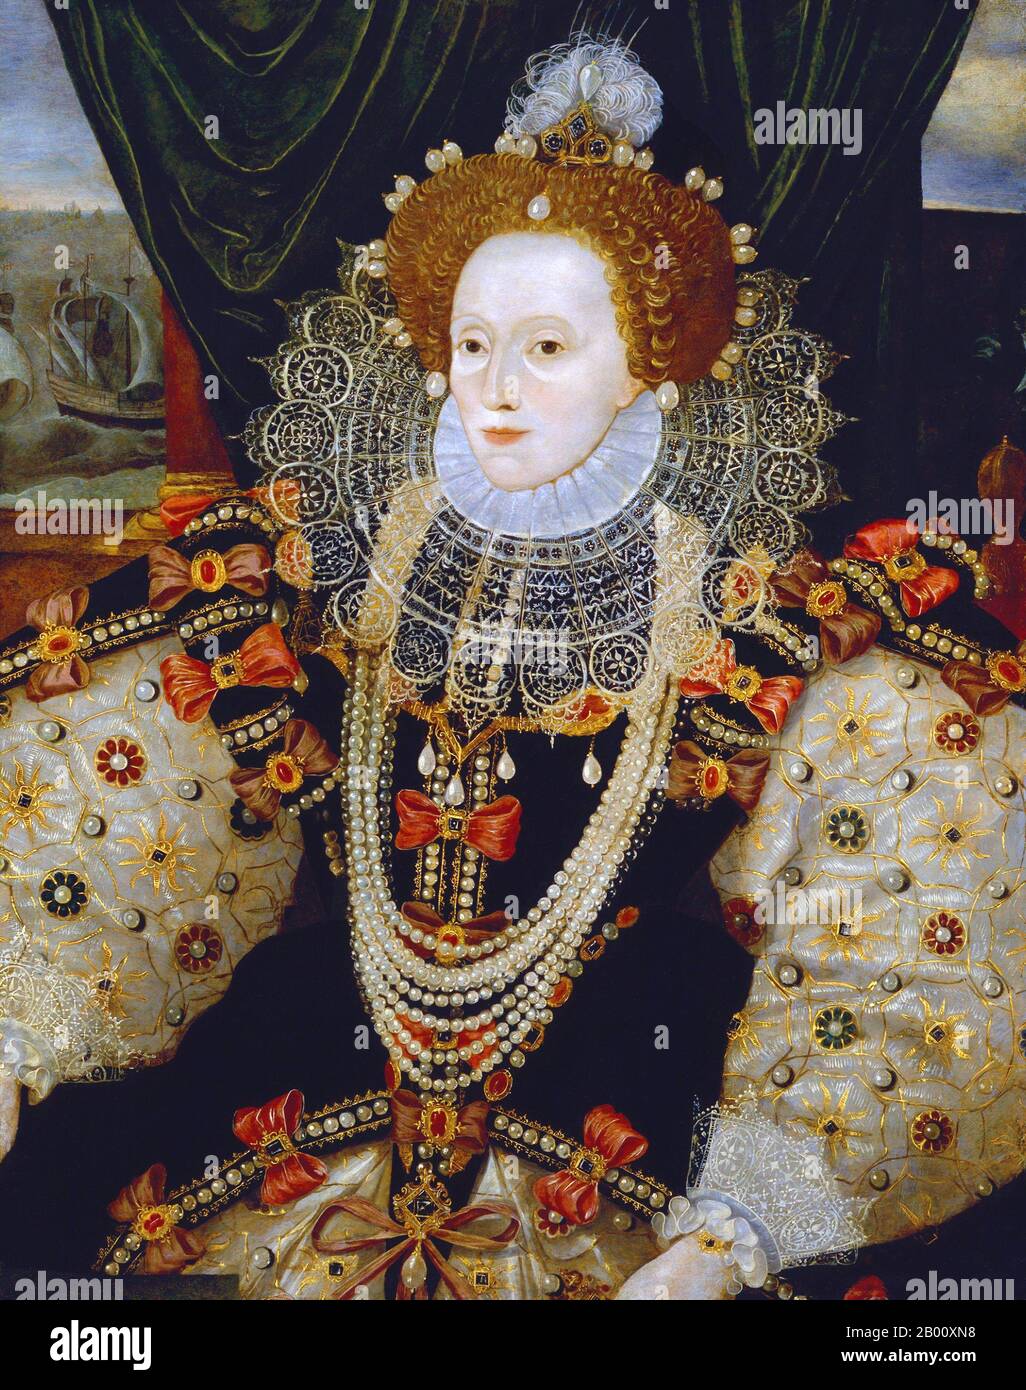 England: 'Portrait of Elizabeth I of England, the Armada Portrait'. Oil on panel painting formerly attributed to George Gower (1540-1596), c. 1588.  Elizabeth I (7 September 1533 – 24 March 1603) was Queen regnant of England and Queen regnant of Ireland from 17 November 1558 until her death. Sometimes called The Virgin Queen, Gloriana, or Good Queen Bess, Elizabeth was the fifth and last monarch of the Tudor dynasty. Elizabeth I's foreign policy with regard to Asia, Africa and Latin America demonstrated a new understanding of the role of England as a maritime, Protestant power globally. Stock Photo